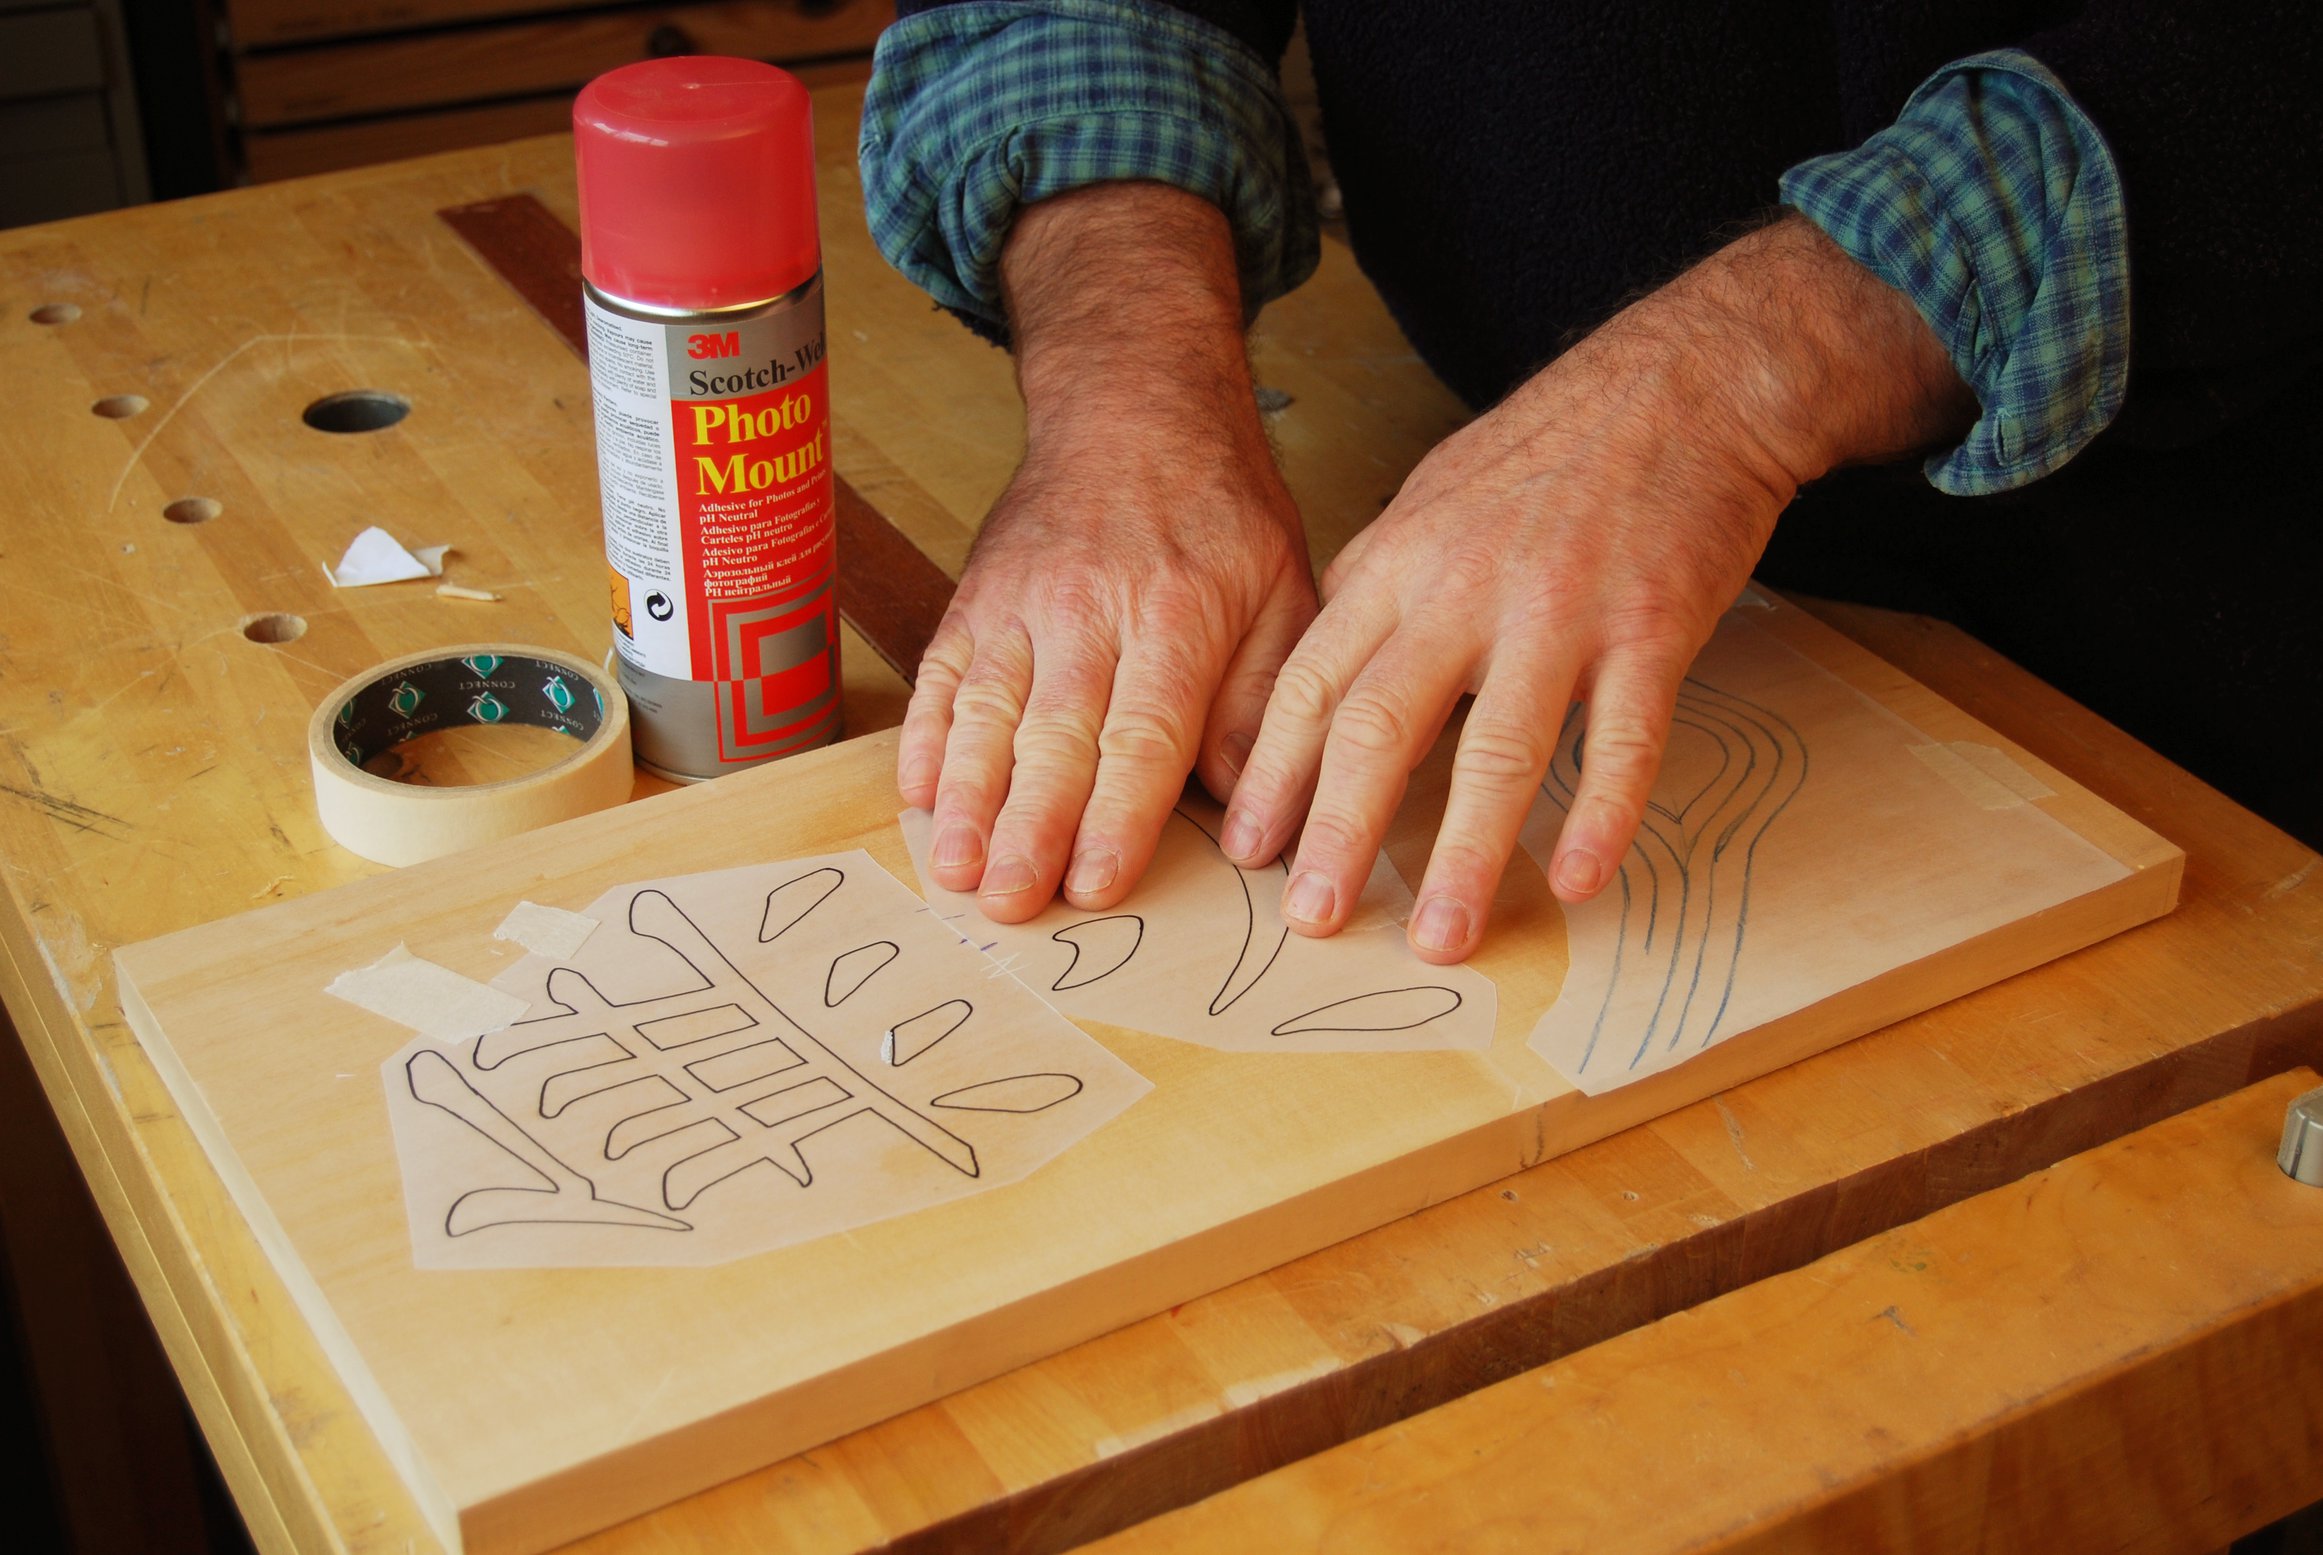 How to Carve Wood Letters: 2 Simple Methods